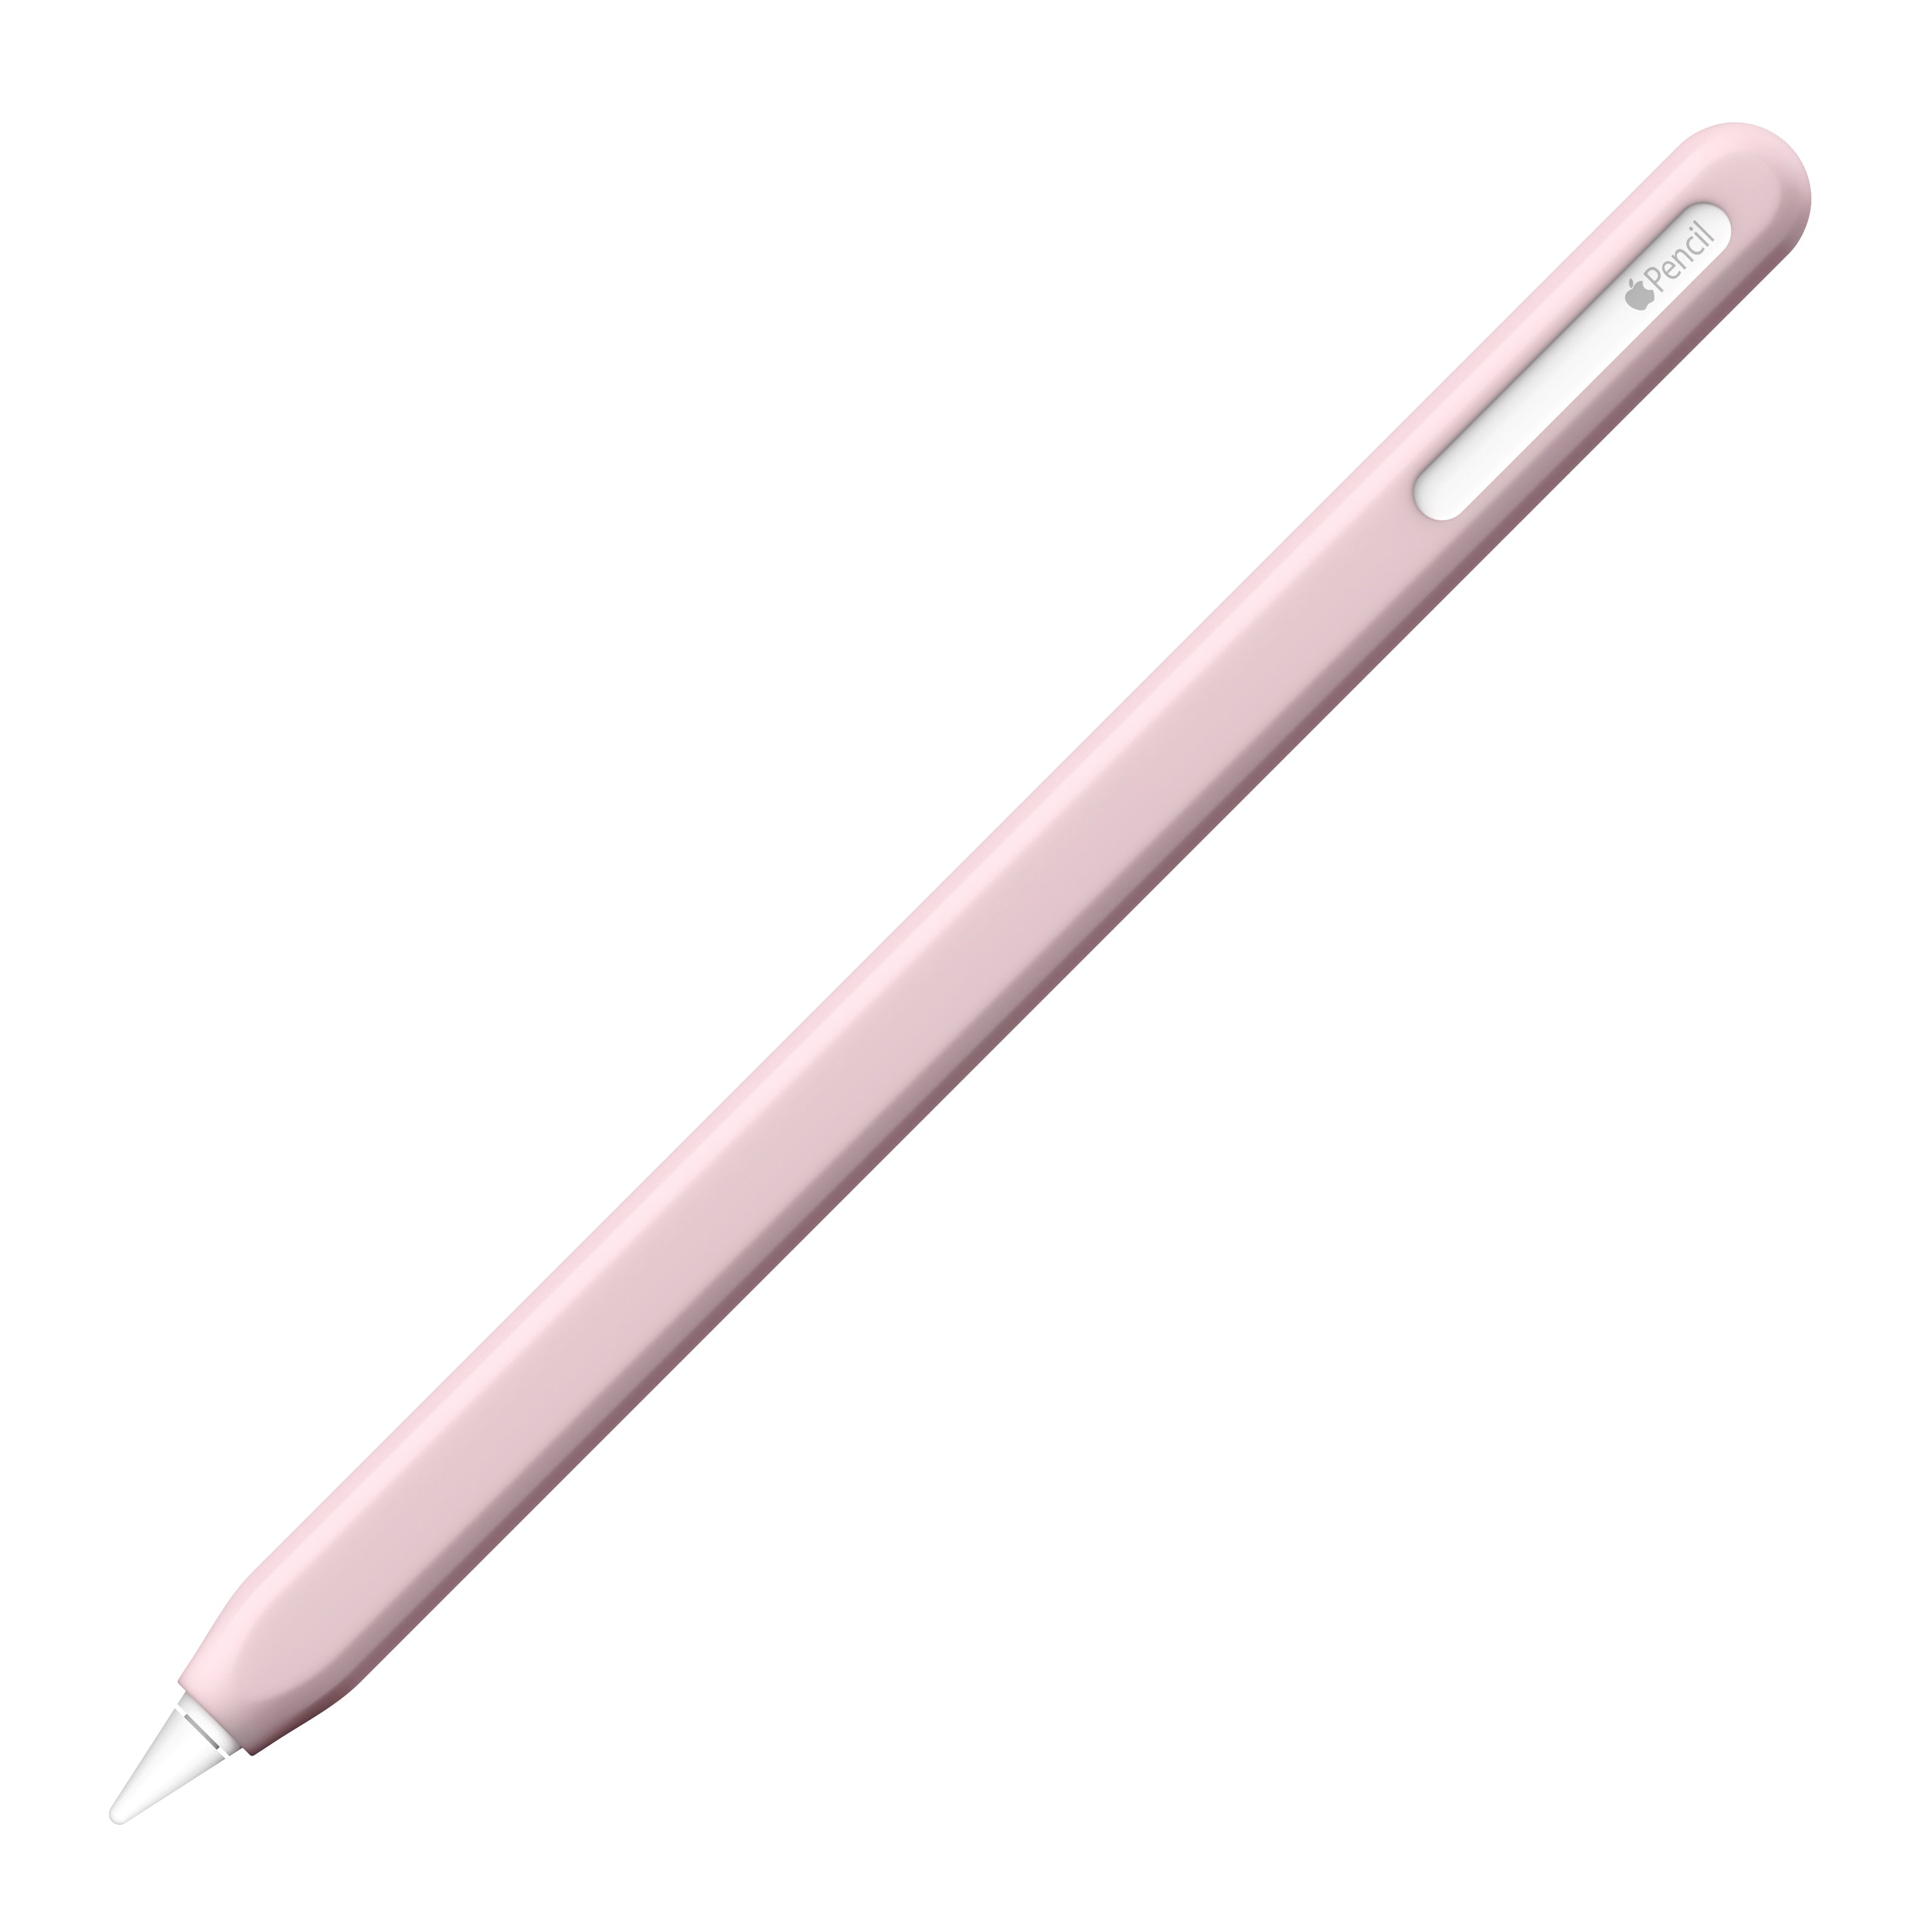 NimbleSleeve Silicone Protective Sleeve for Apple Pencil Pro/2nd Generation